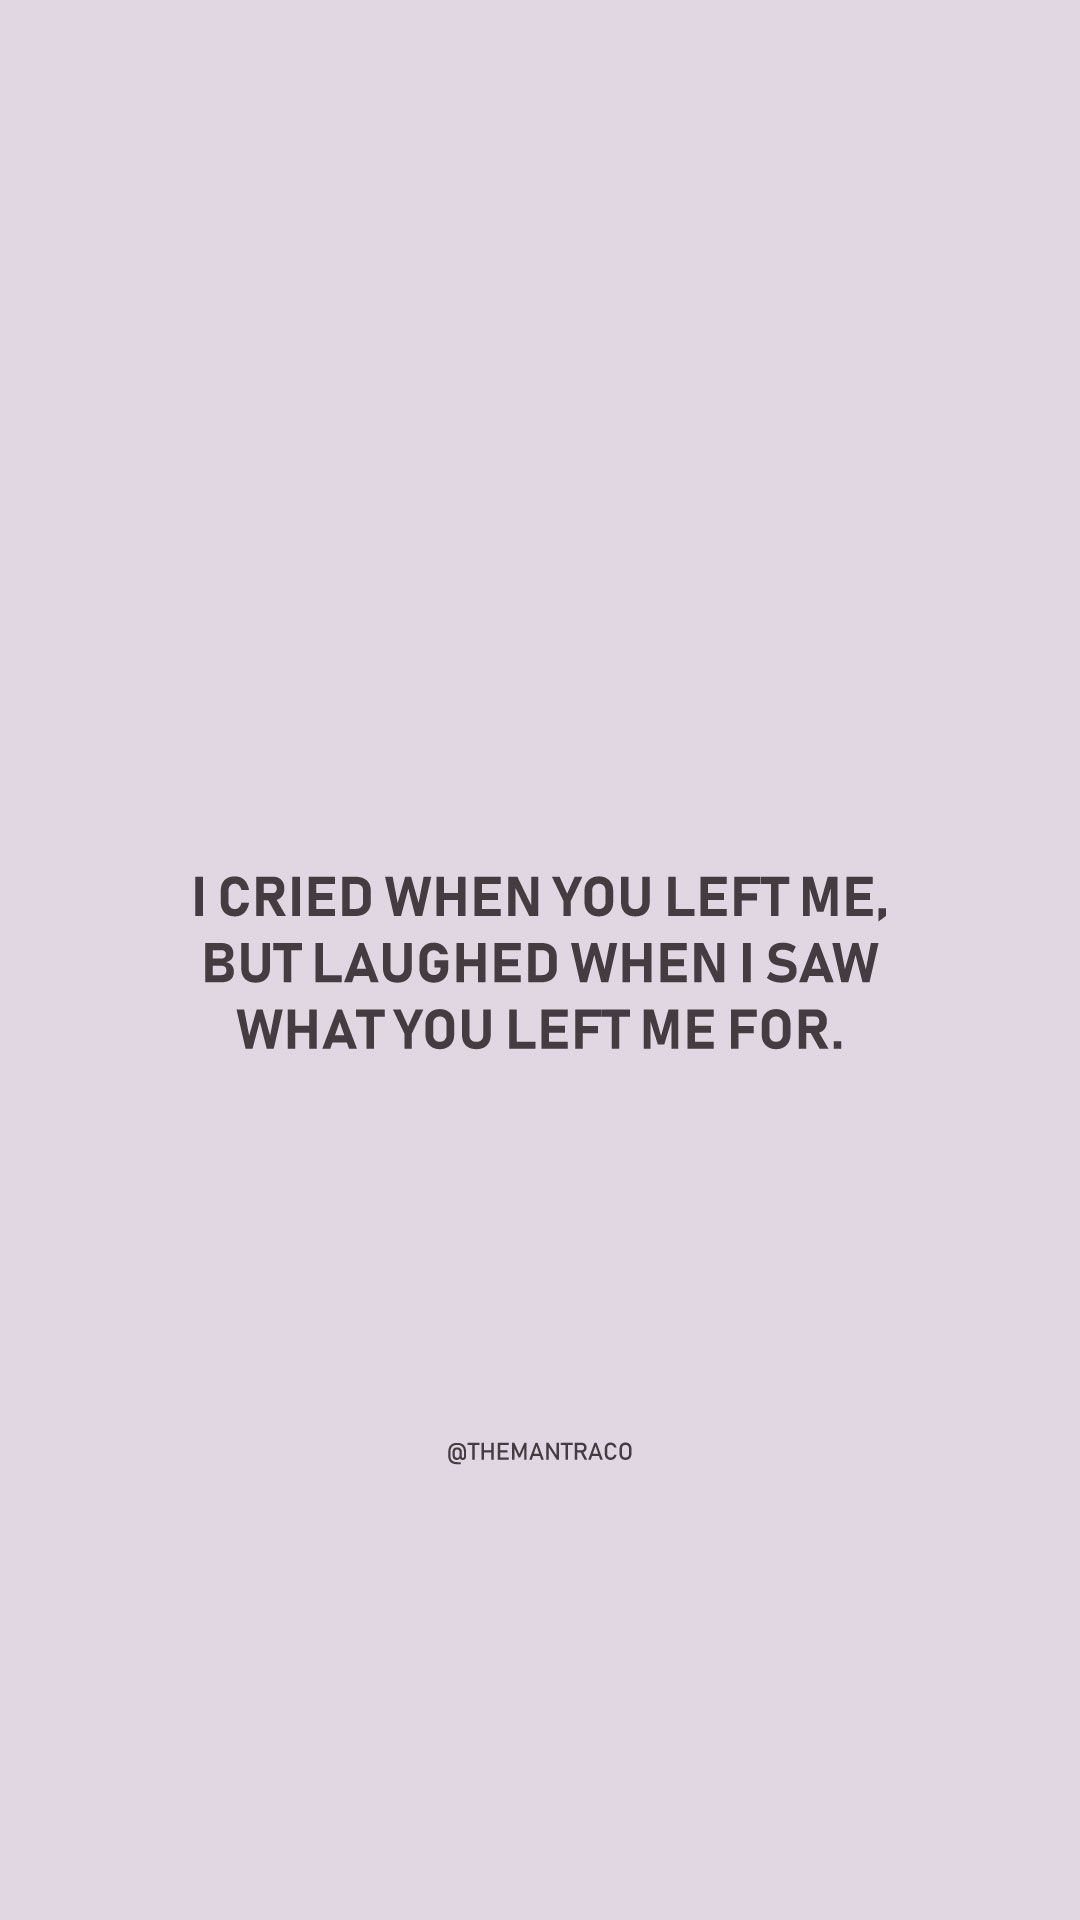 Savage Breakup Quotes. Breakup quotes, You left me, Quotes